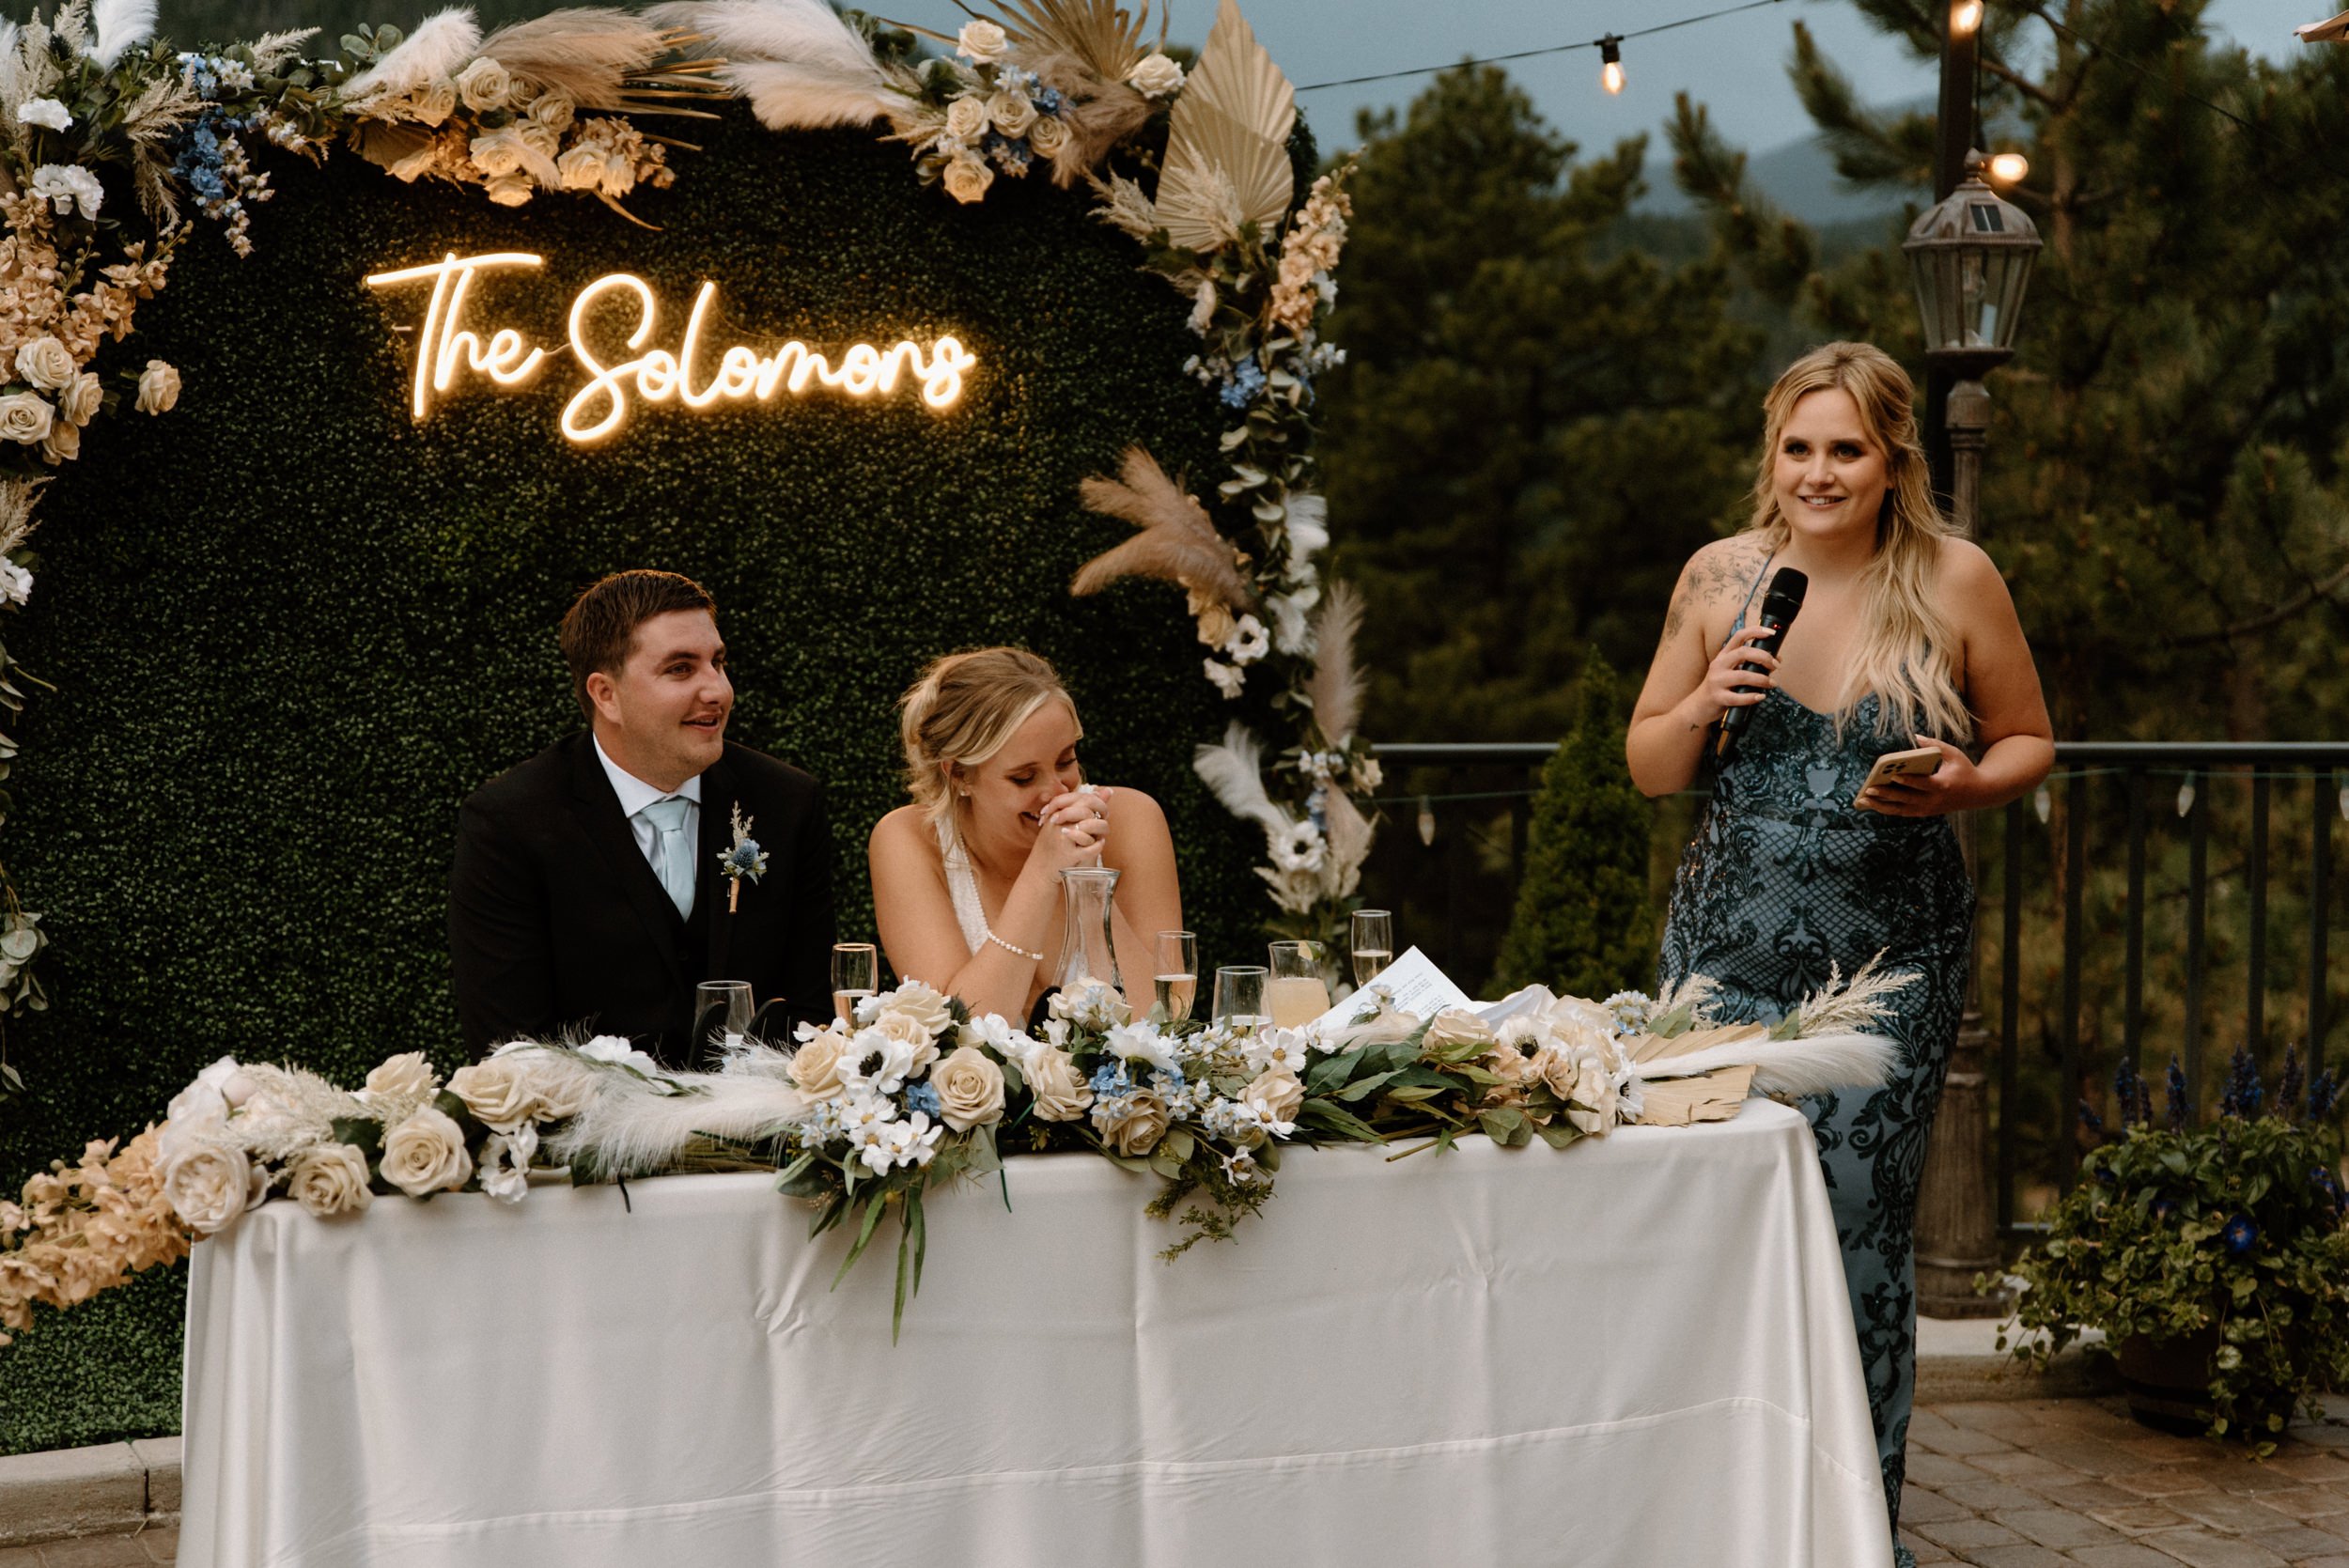 A bridesmaid gives a toast to the couple as they laugh